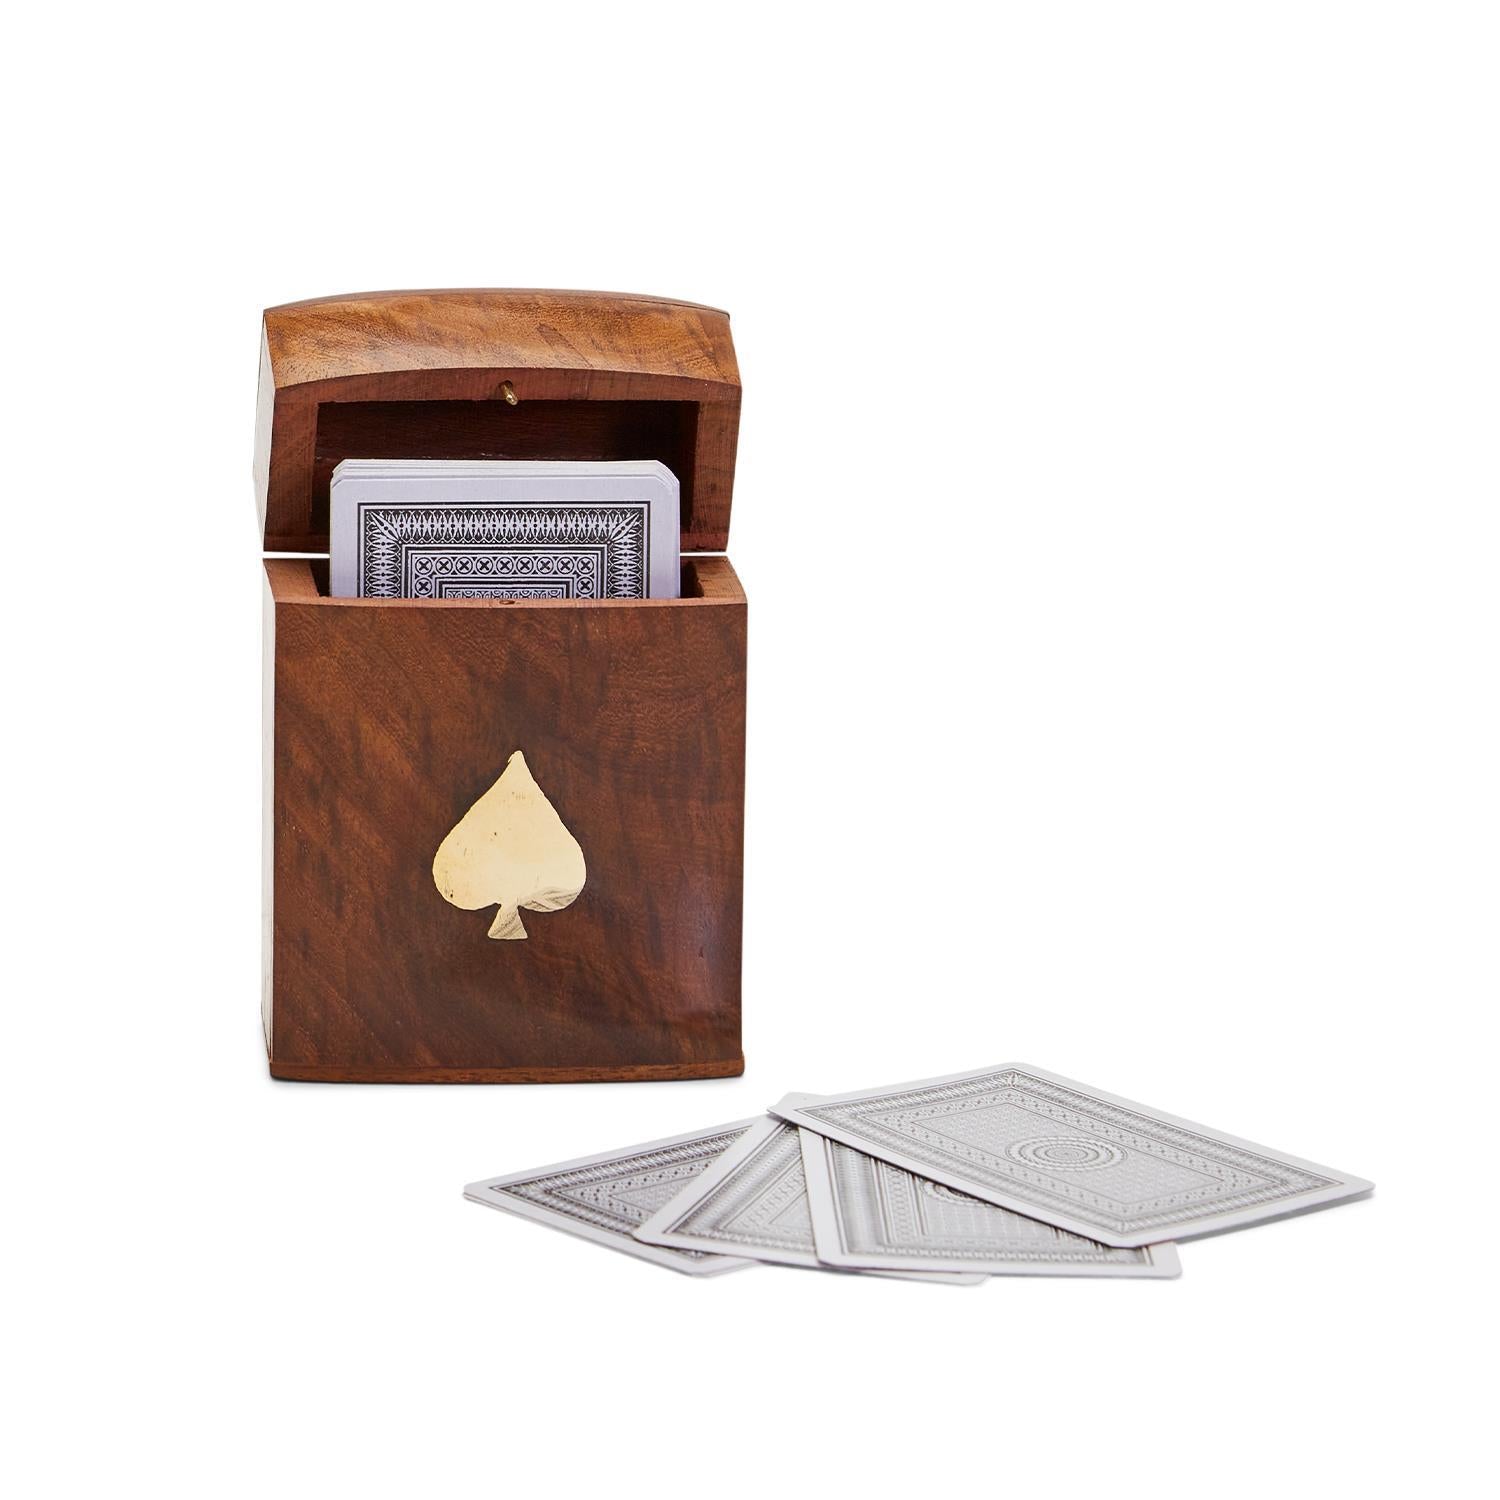 Wood crafted Playing Card Set In Wooden Box